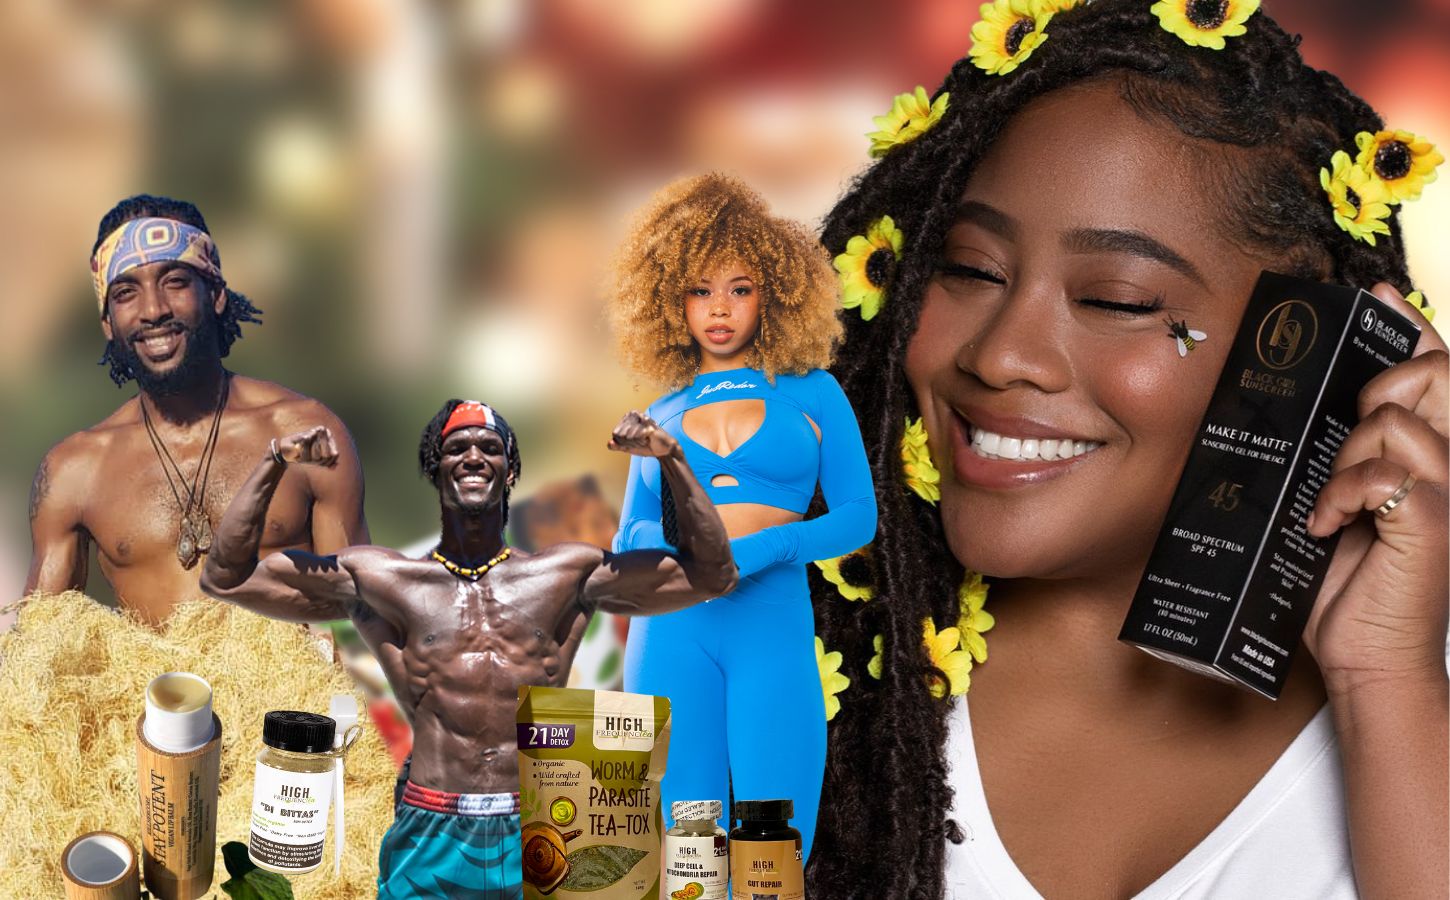 People and products from eight Black-owned vegan businesses